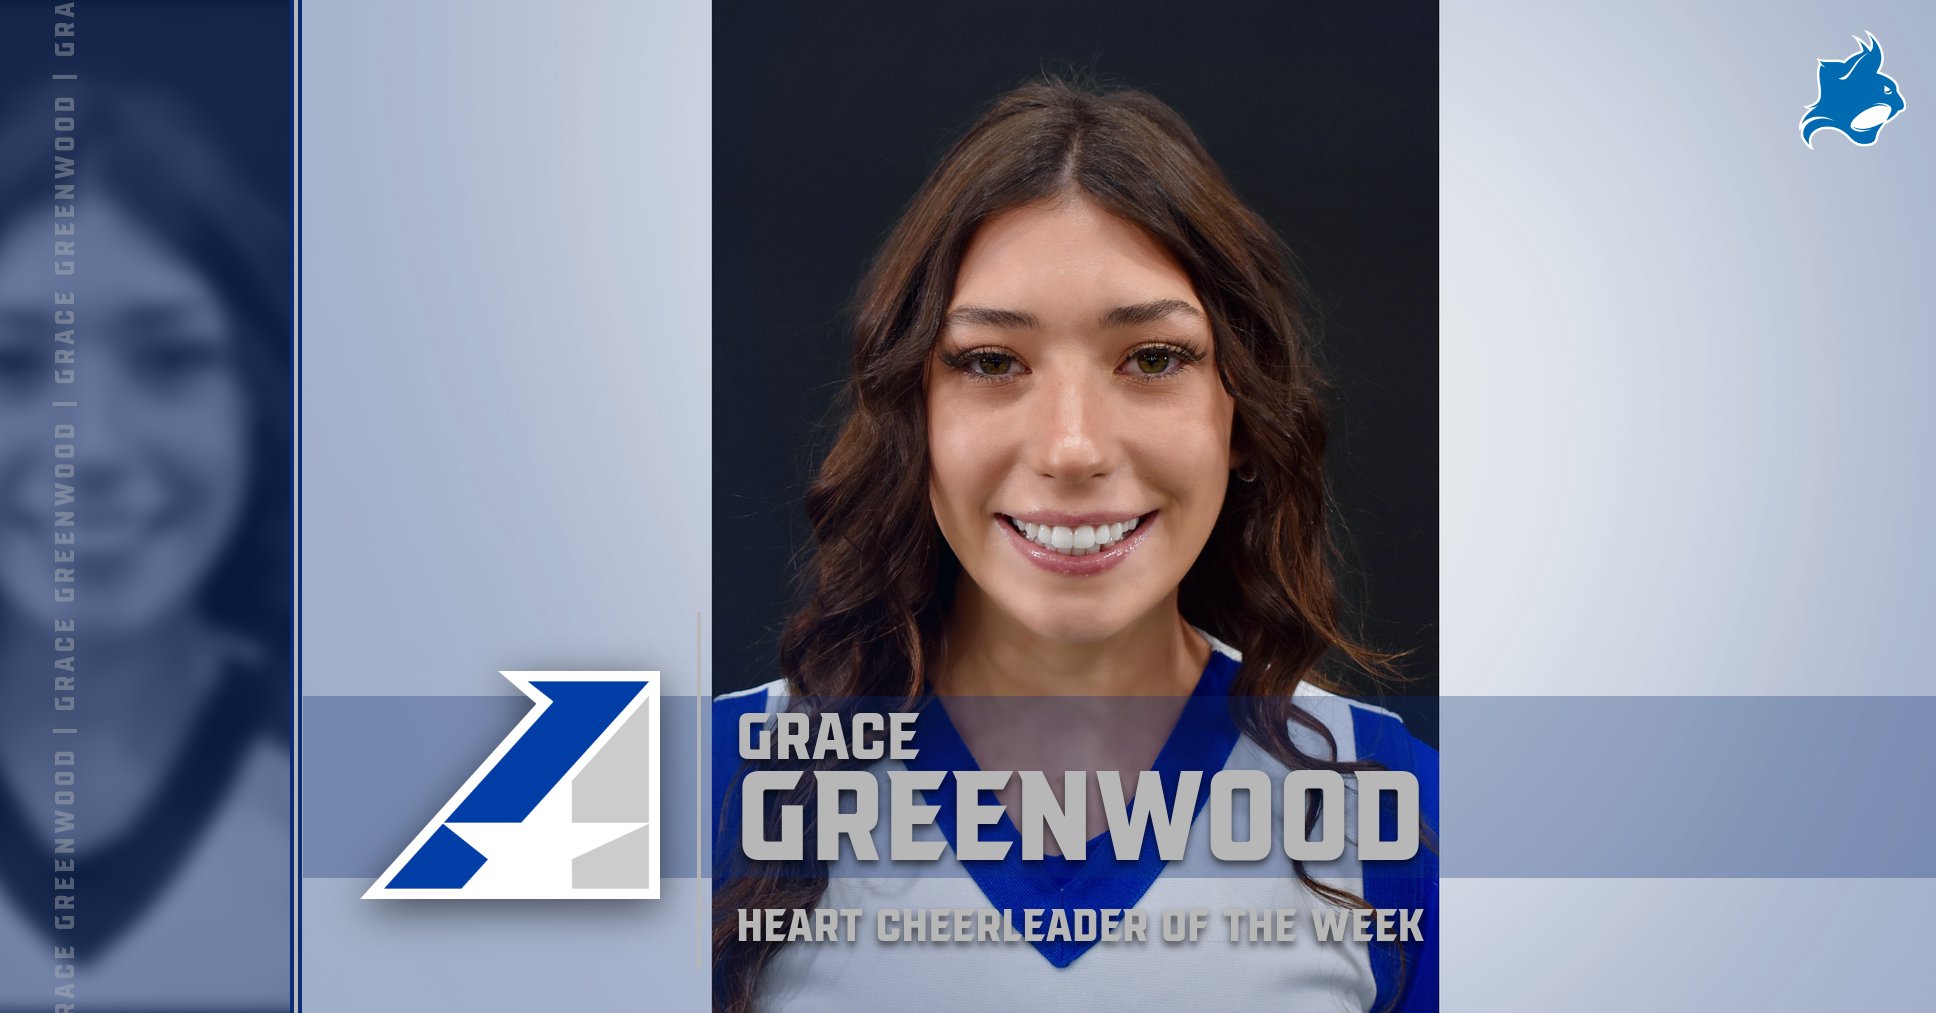 Peru State&rsquo;s Grace Greenwood Selected Heart Cheerleader of the Week